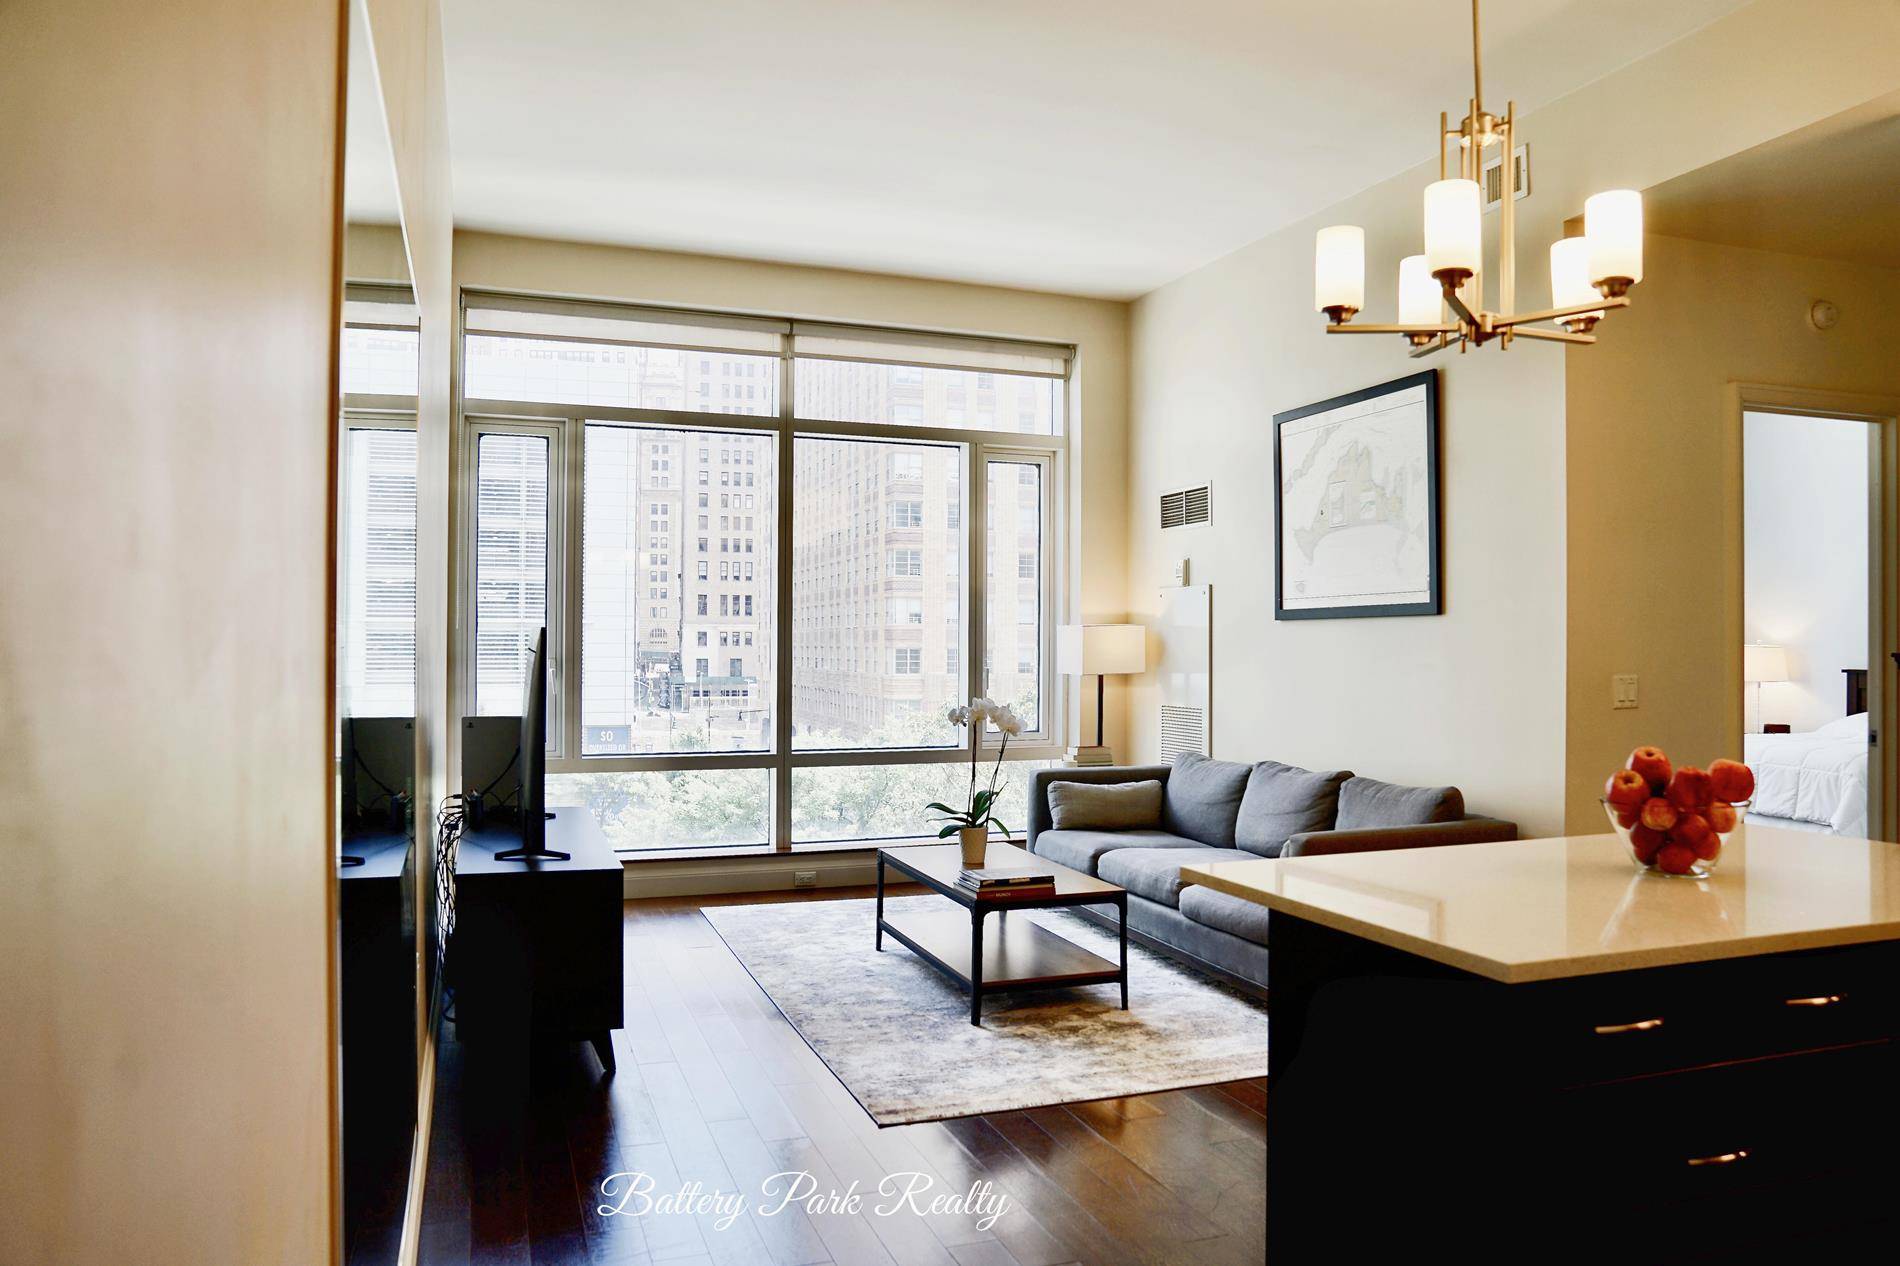 Spectacular loft like one bedroom home featuring an open floor plan, a wall of windows and perfectly situated in the heart of Battery Park City and the New Downtown.